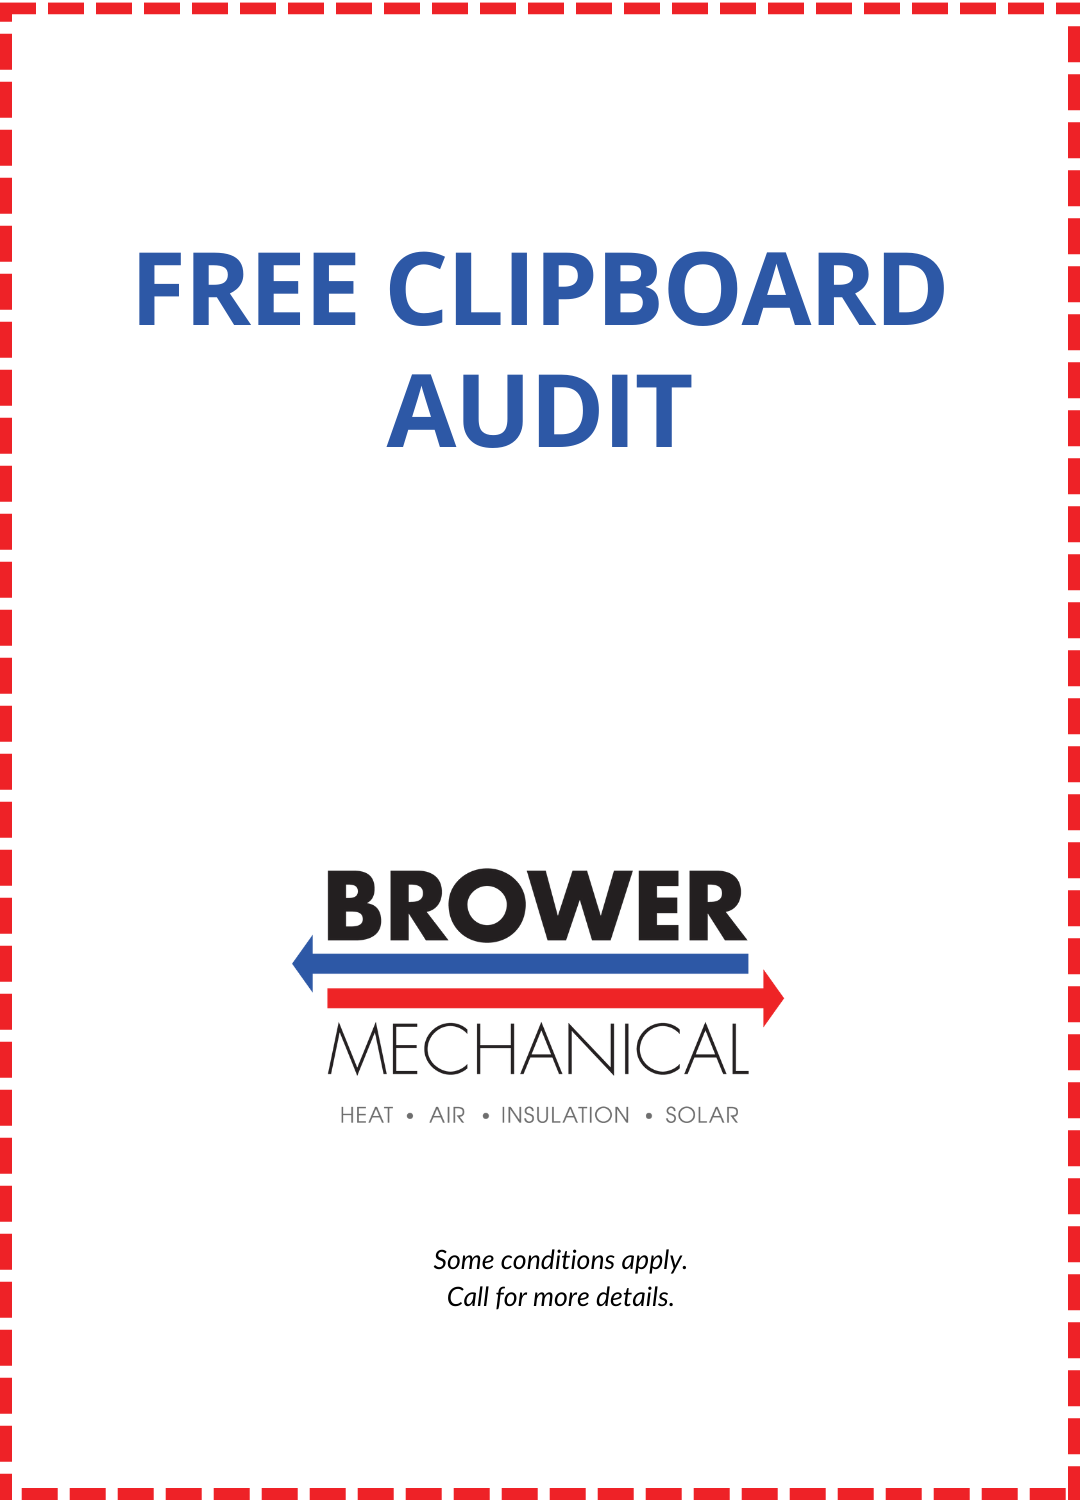 Brower Special Free Clipboard Audit Offer Graphic Coupon